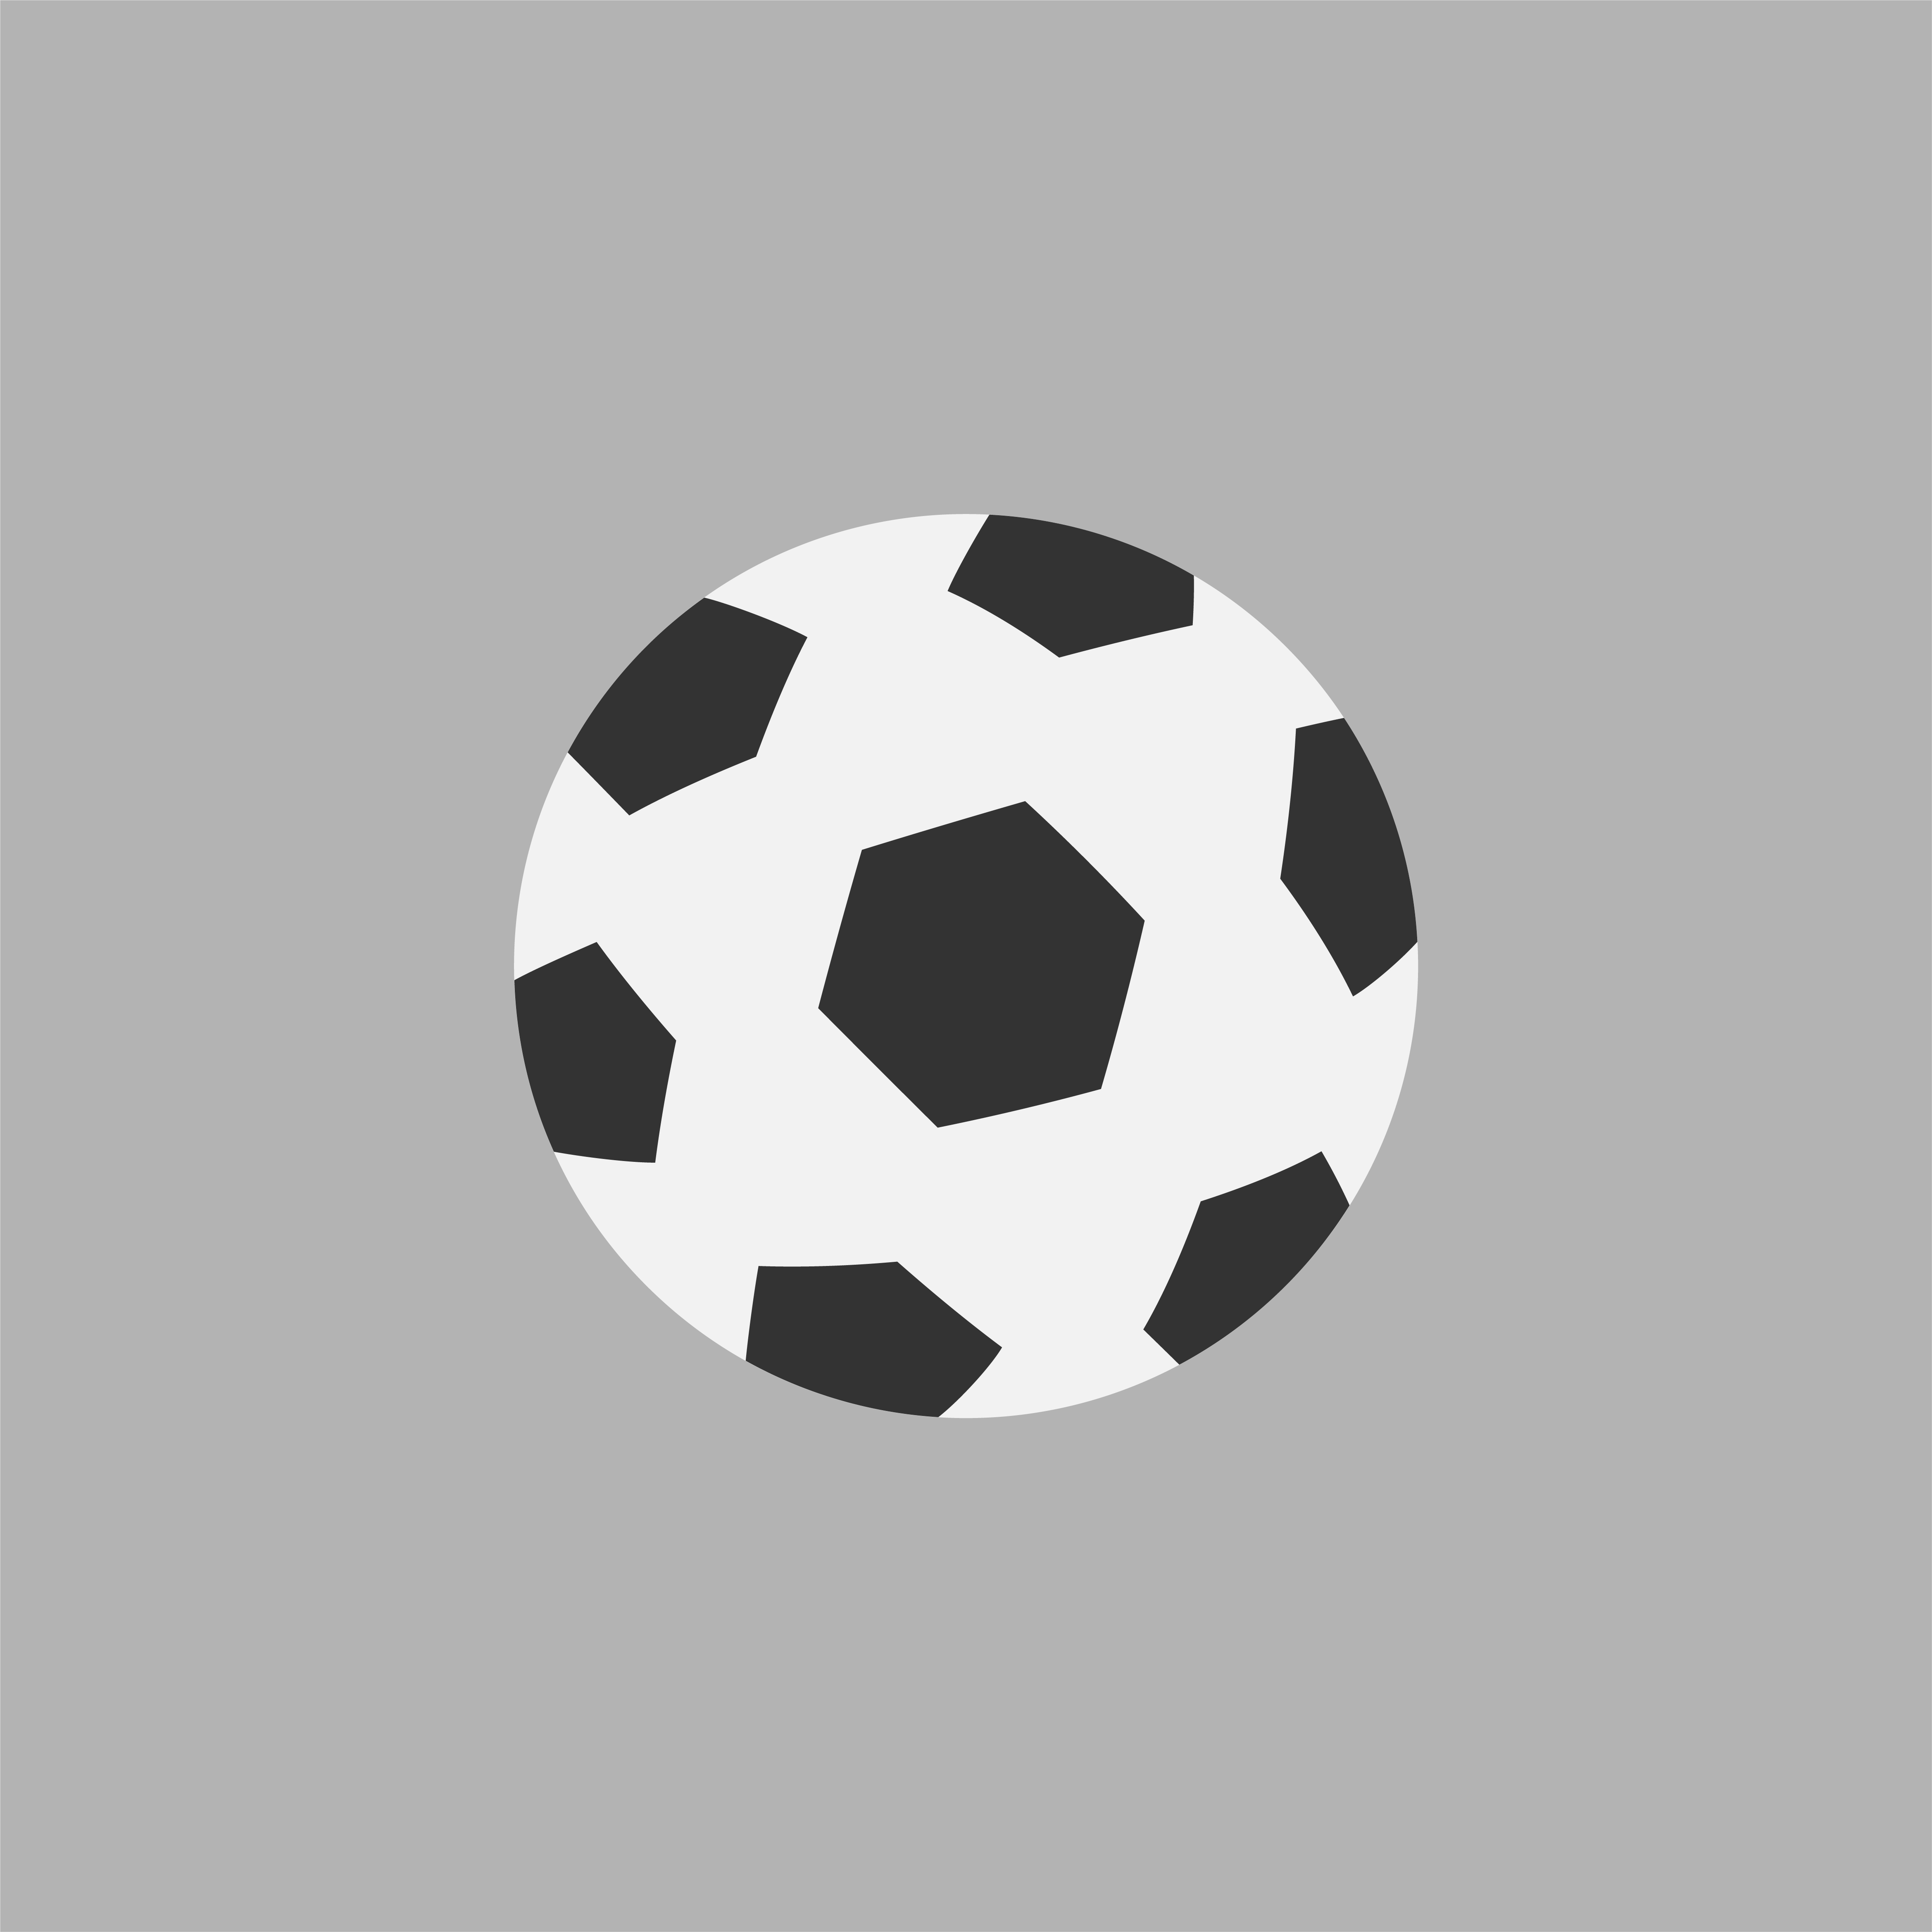 Download Illustration of soccer ball icon - Download Free Vectors ...